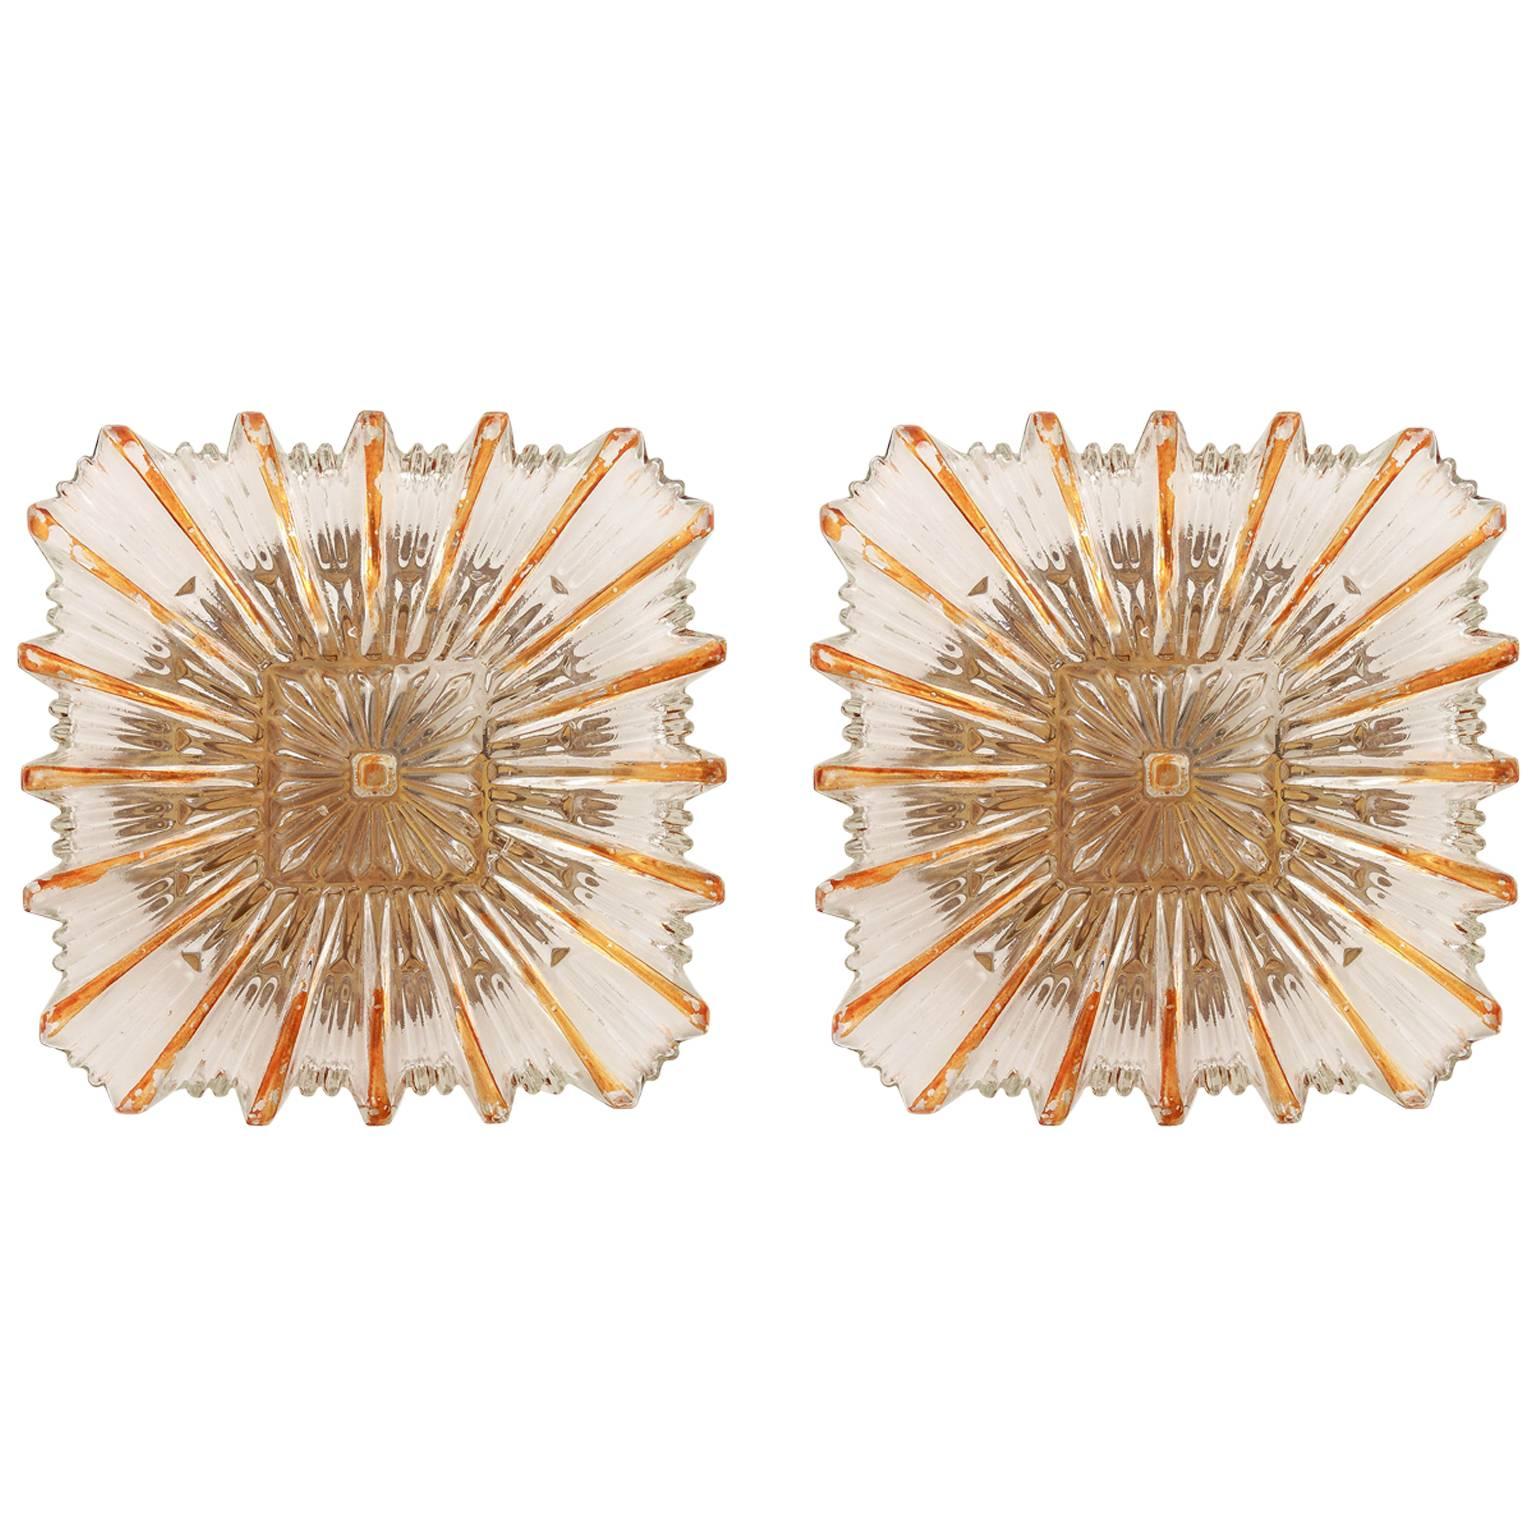 Pair of Amber Tone Glass Sconces or Flush Mount Light Fixtures, 1960s